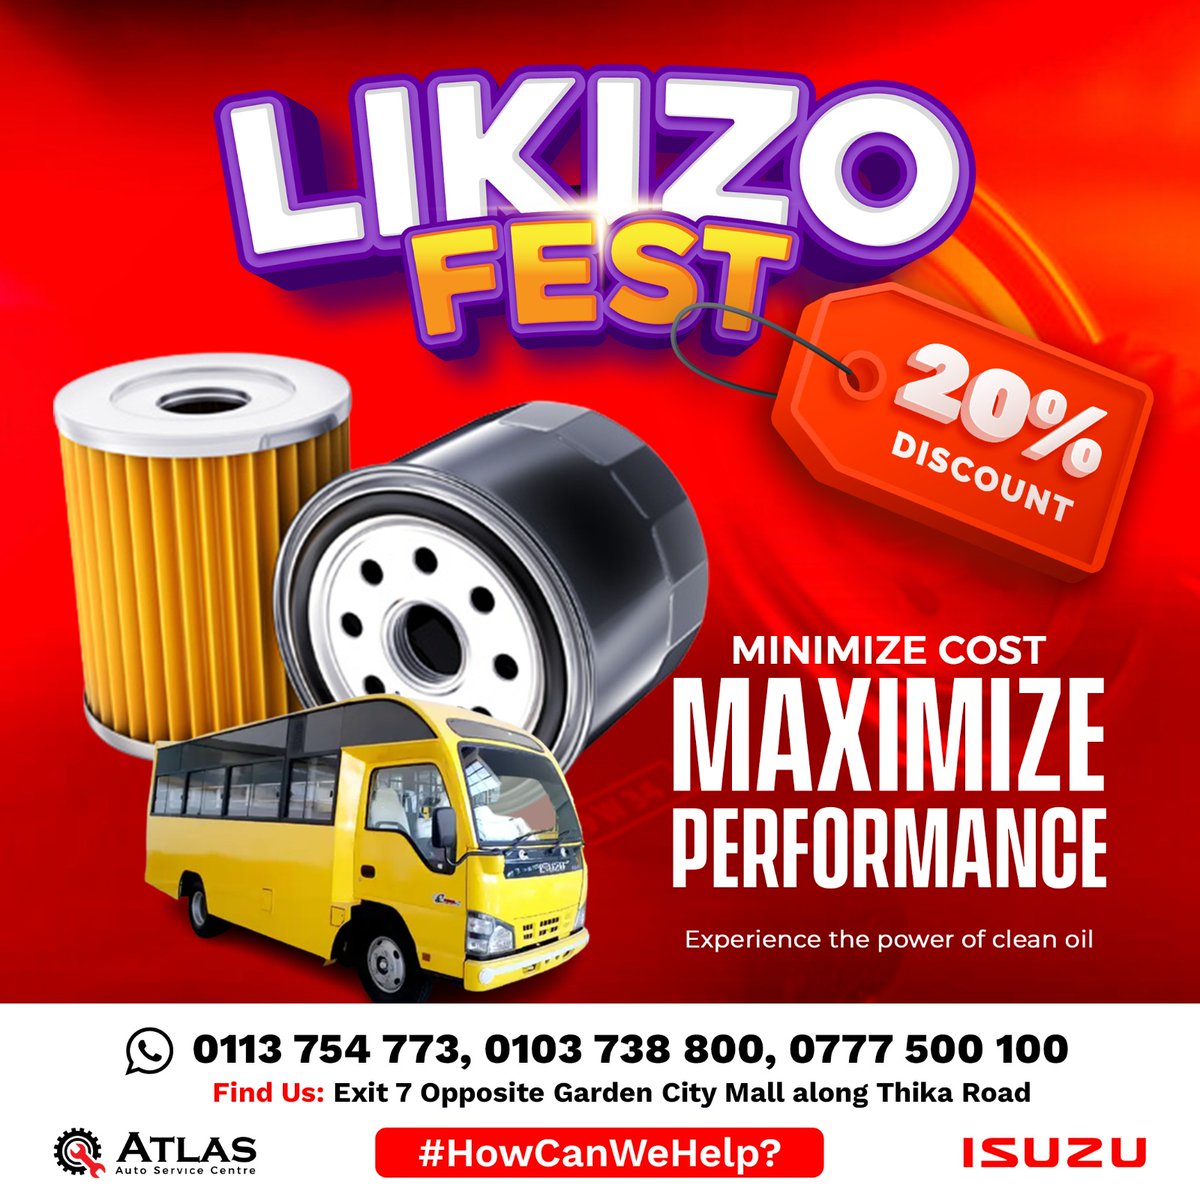 ✨ Experience the thrill of clean oil's performance boost. Join us at Likizo Fest and unleash your engine's potential. Get ready for a ride that's both powerful and cost-effective! 💪🌟#howcanwehelp #LikizoFest #CleanOilPower #MaximizePerformance